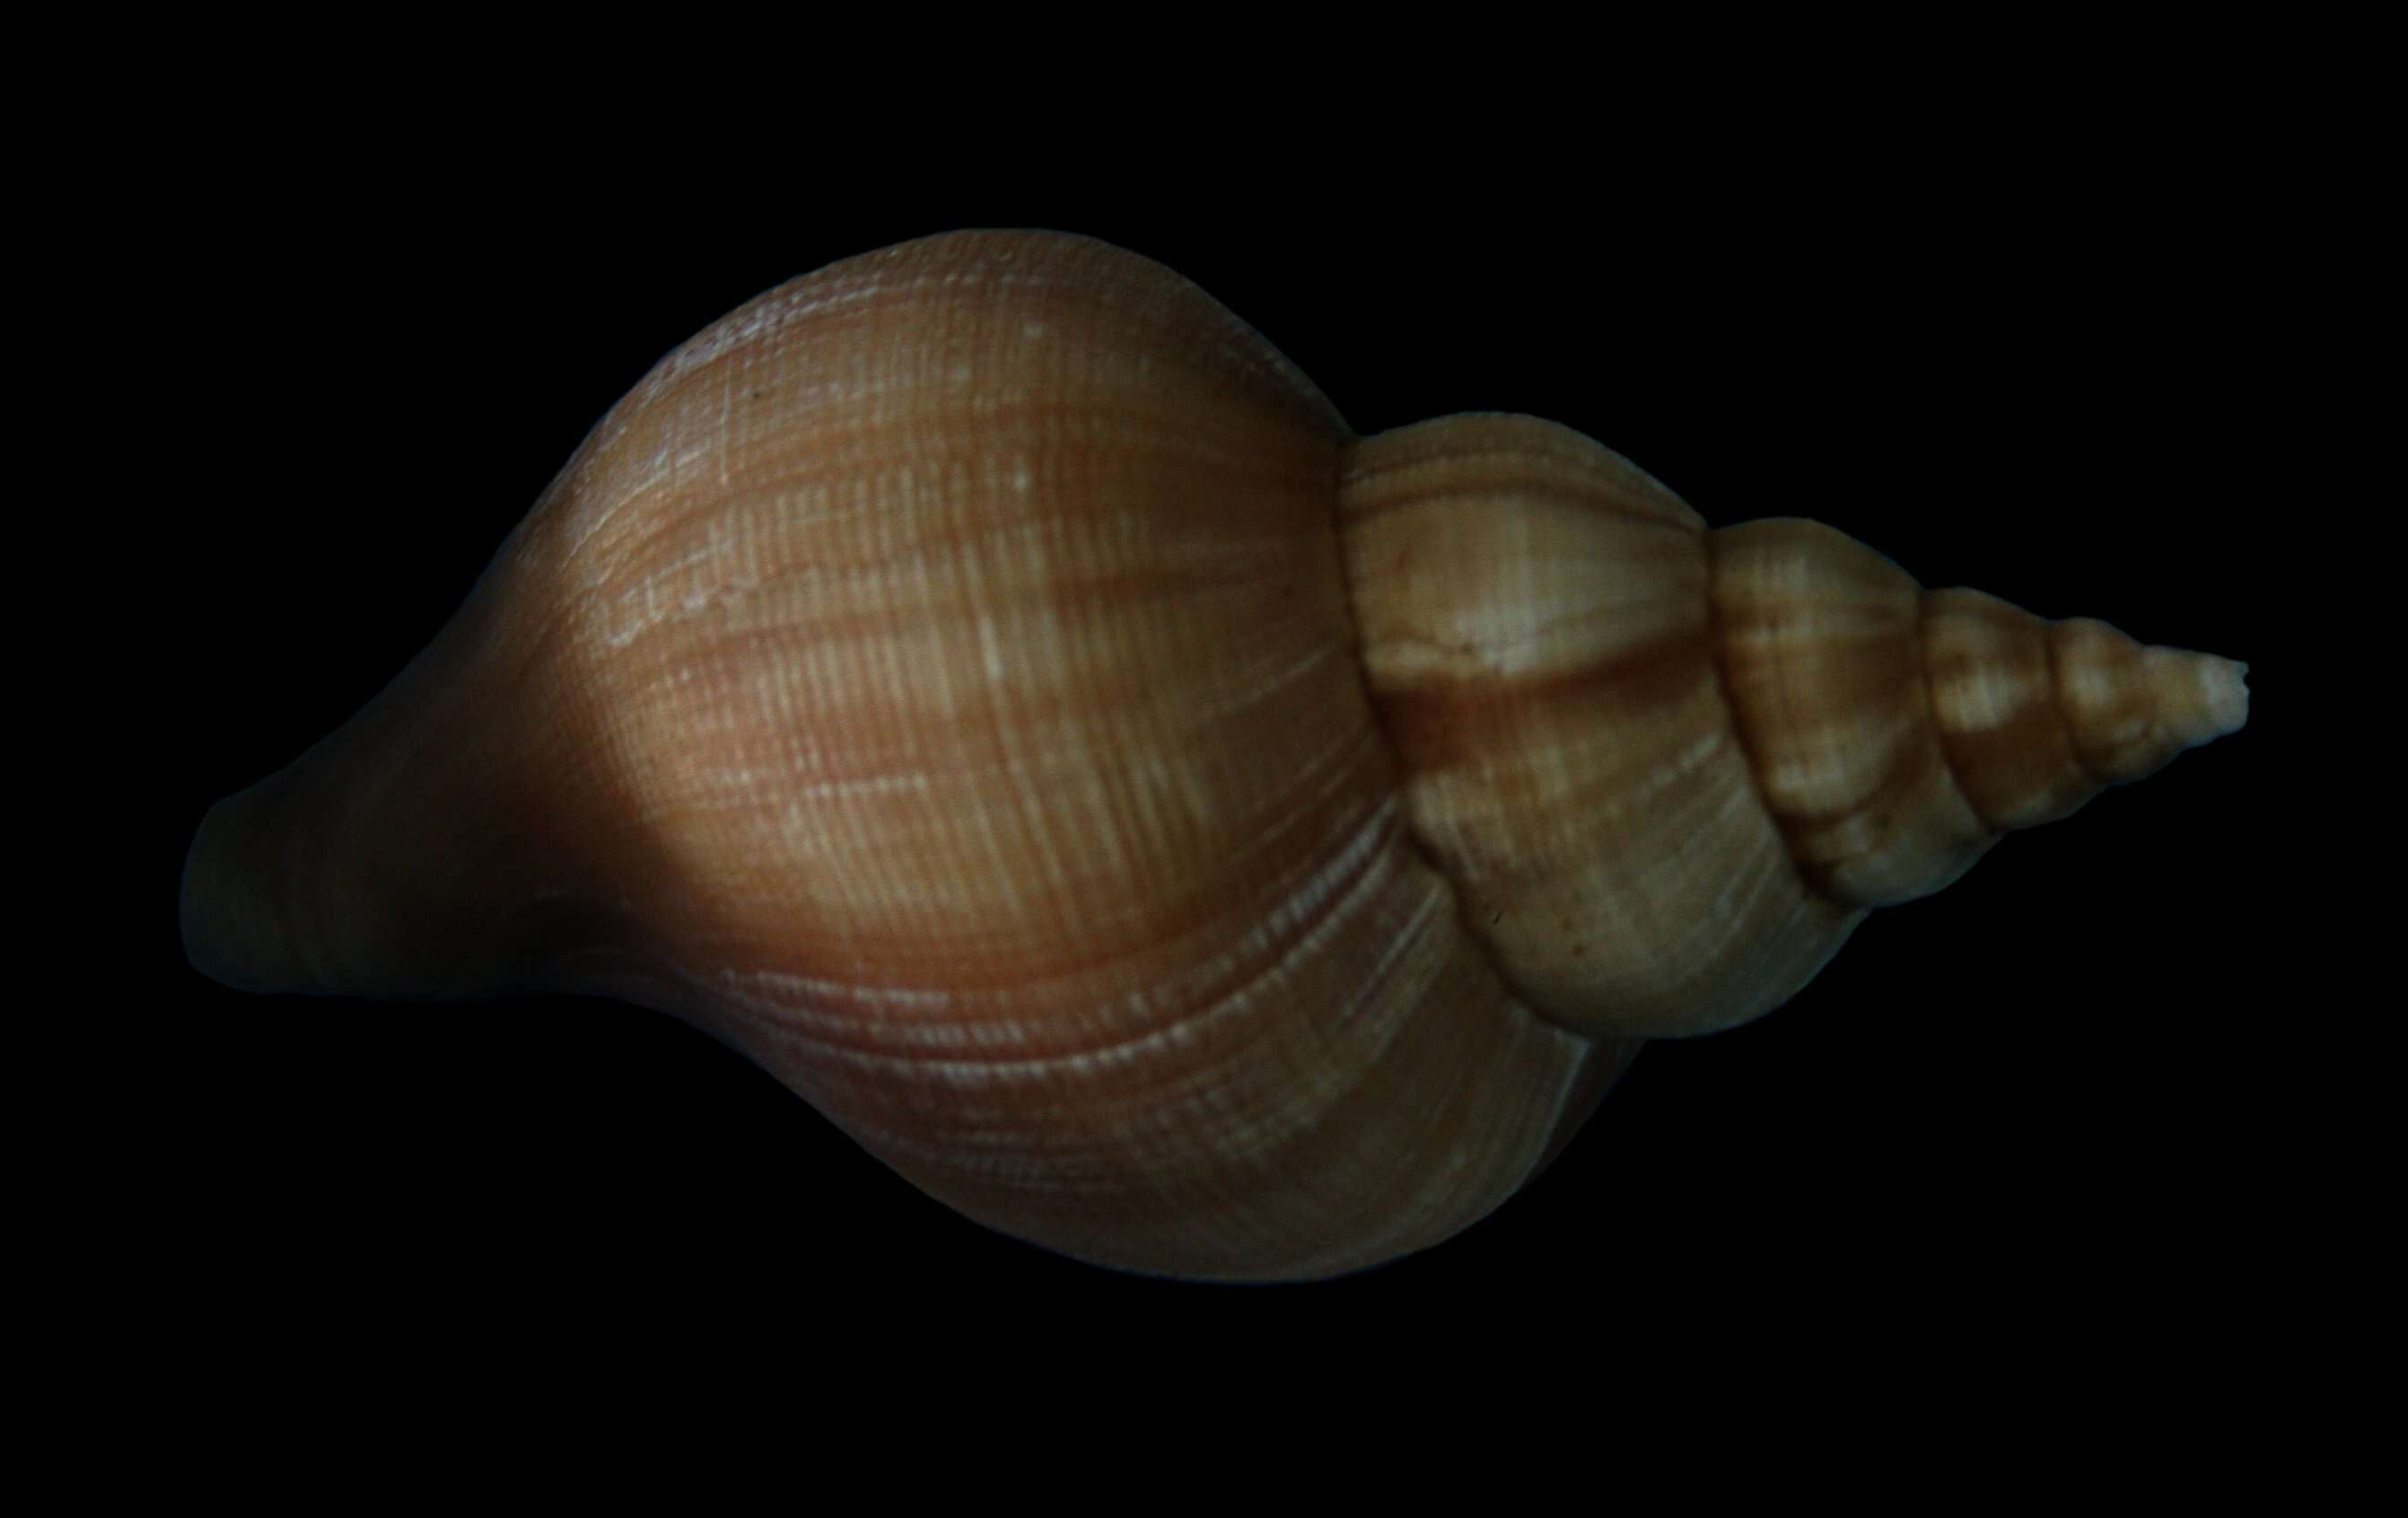 Image of ancient neptune snail